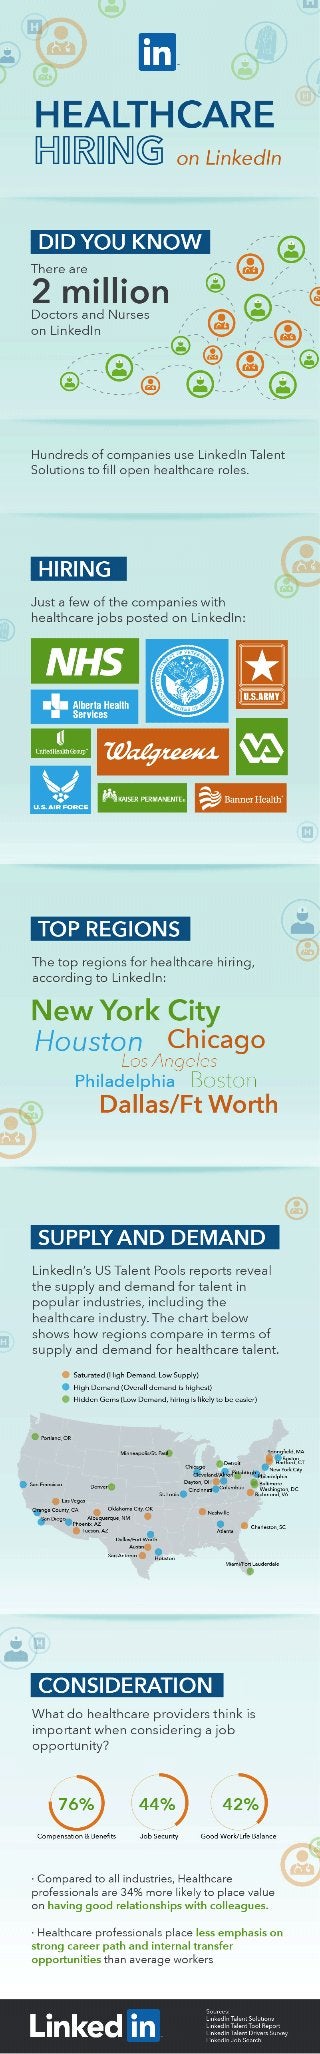 Over 2 Million North American Doctors and Nurses are on LinkedIn | INFOGRAPHIC